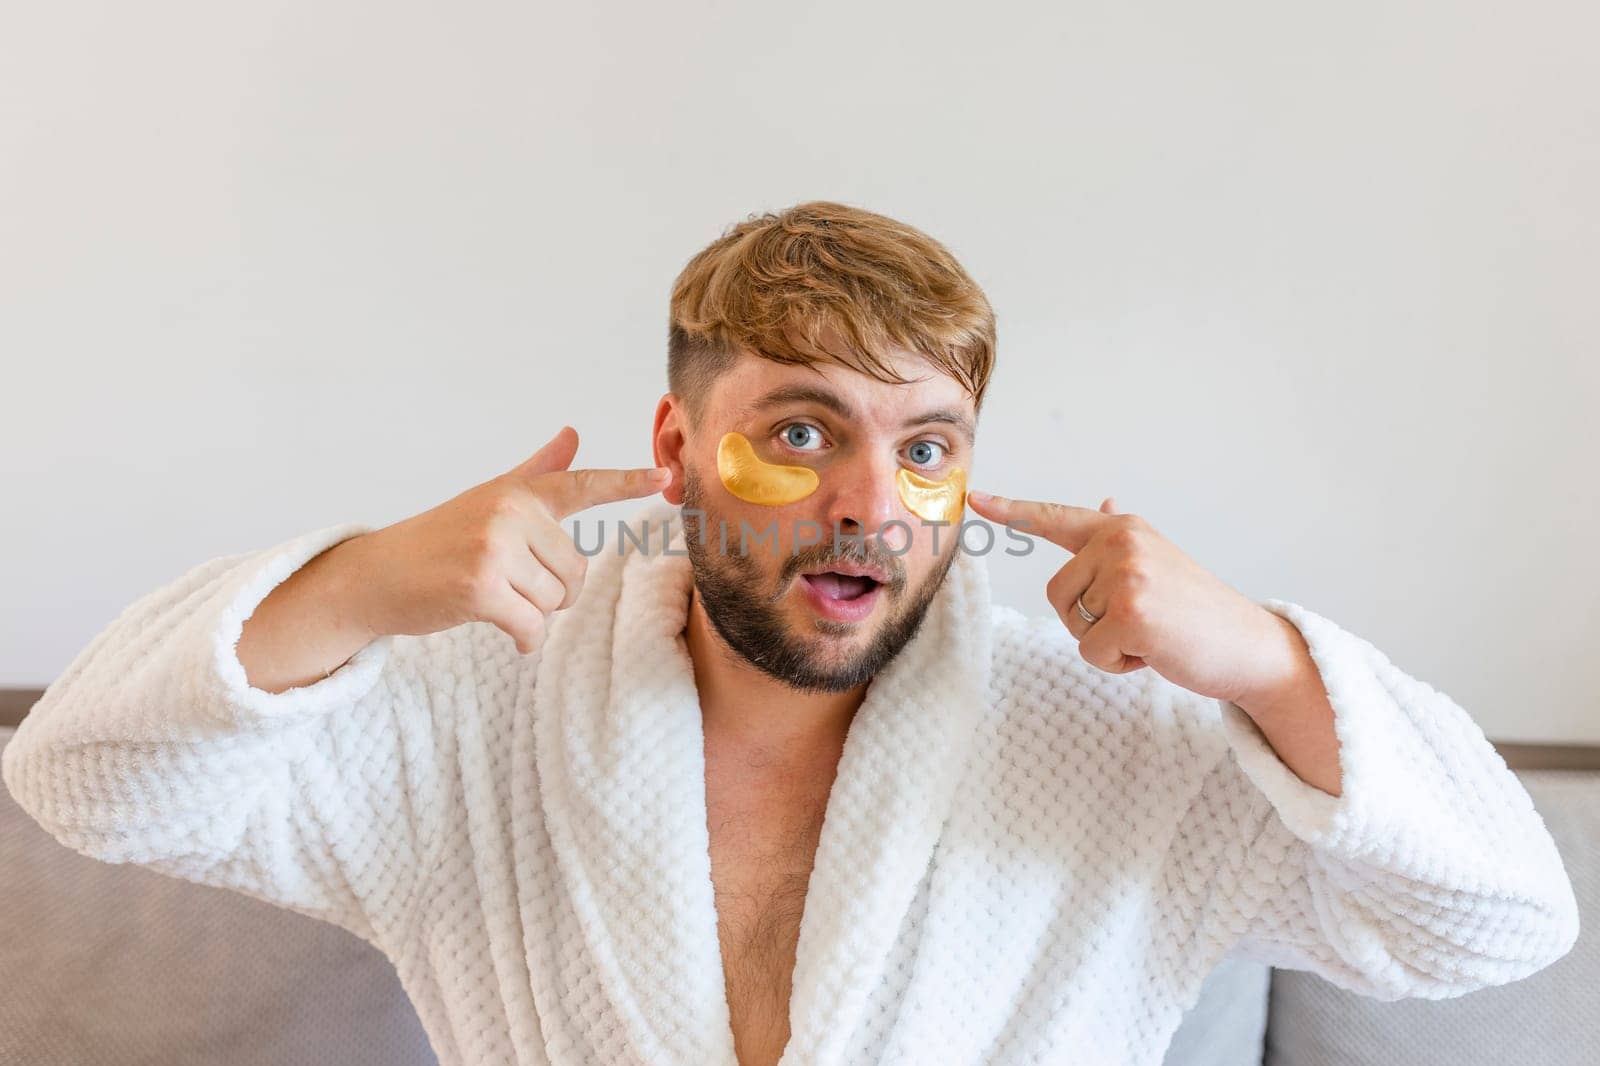 Beauty treatments, skin care, metrosexual concept. A handsome bearded man with golden bandages under his eyes makes funny faces with facial expressions.